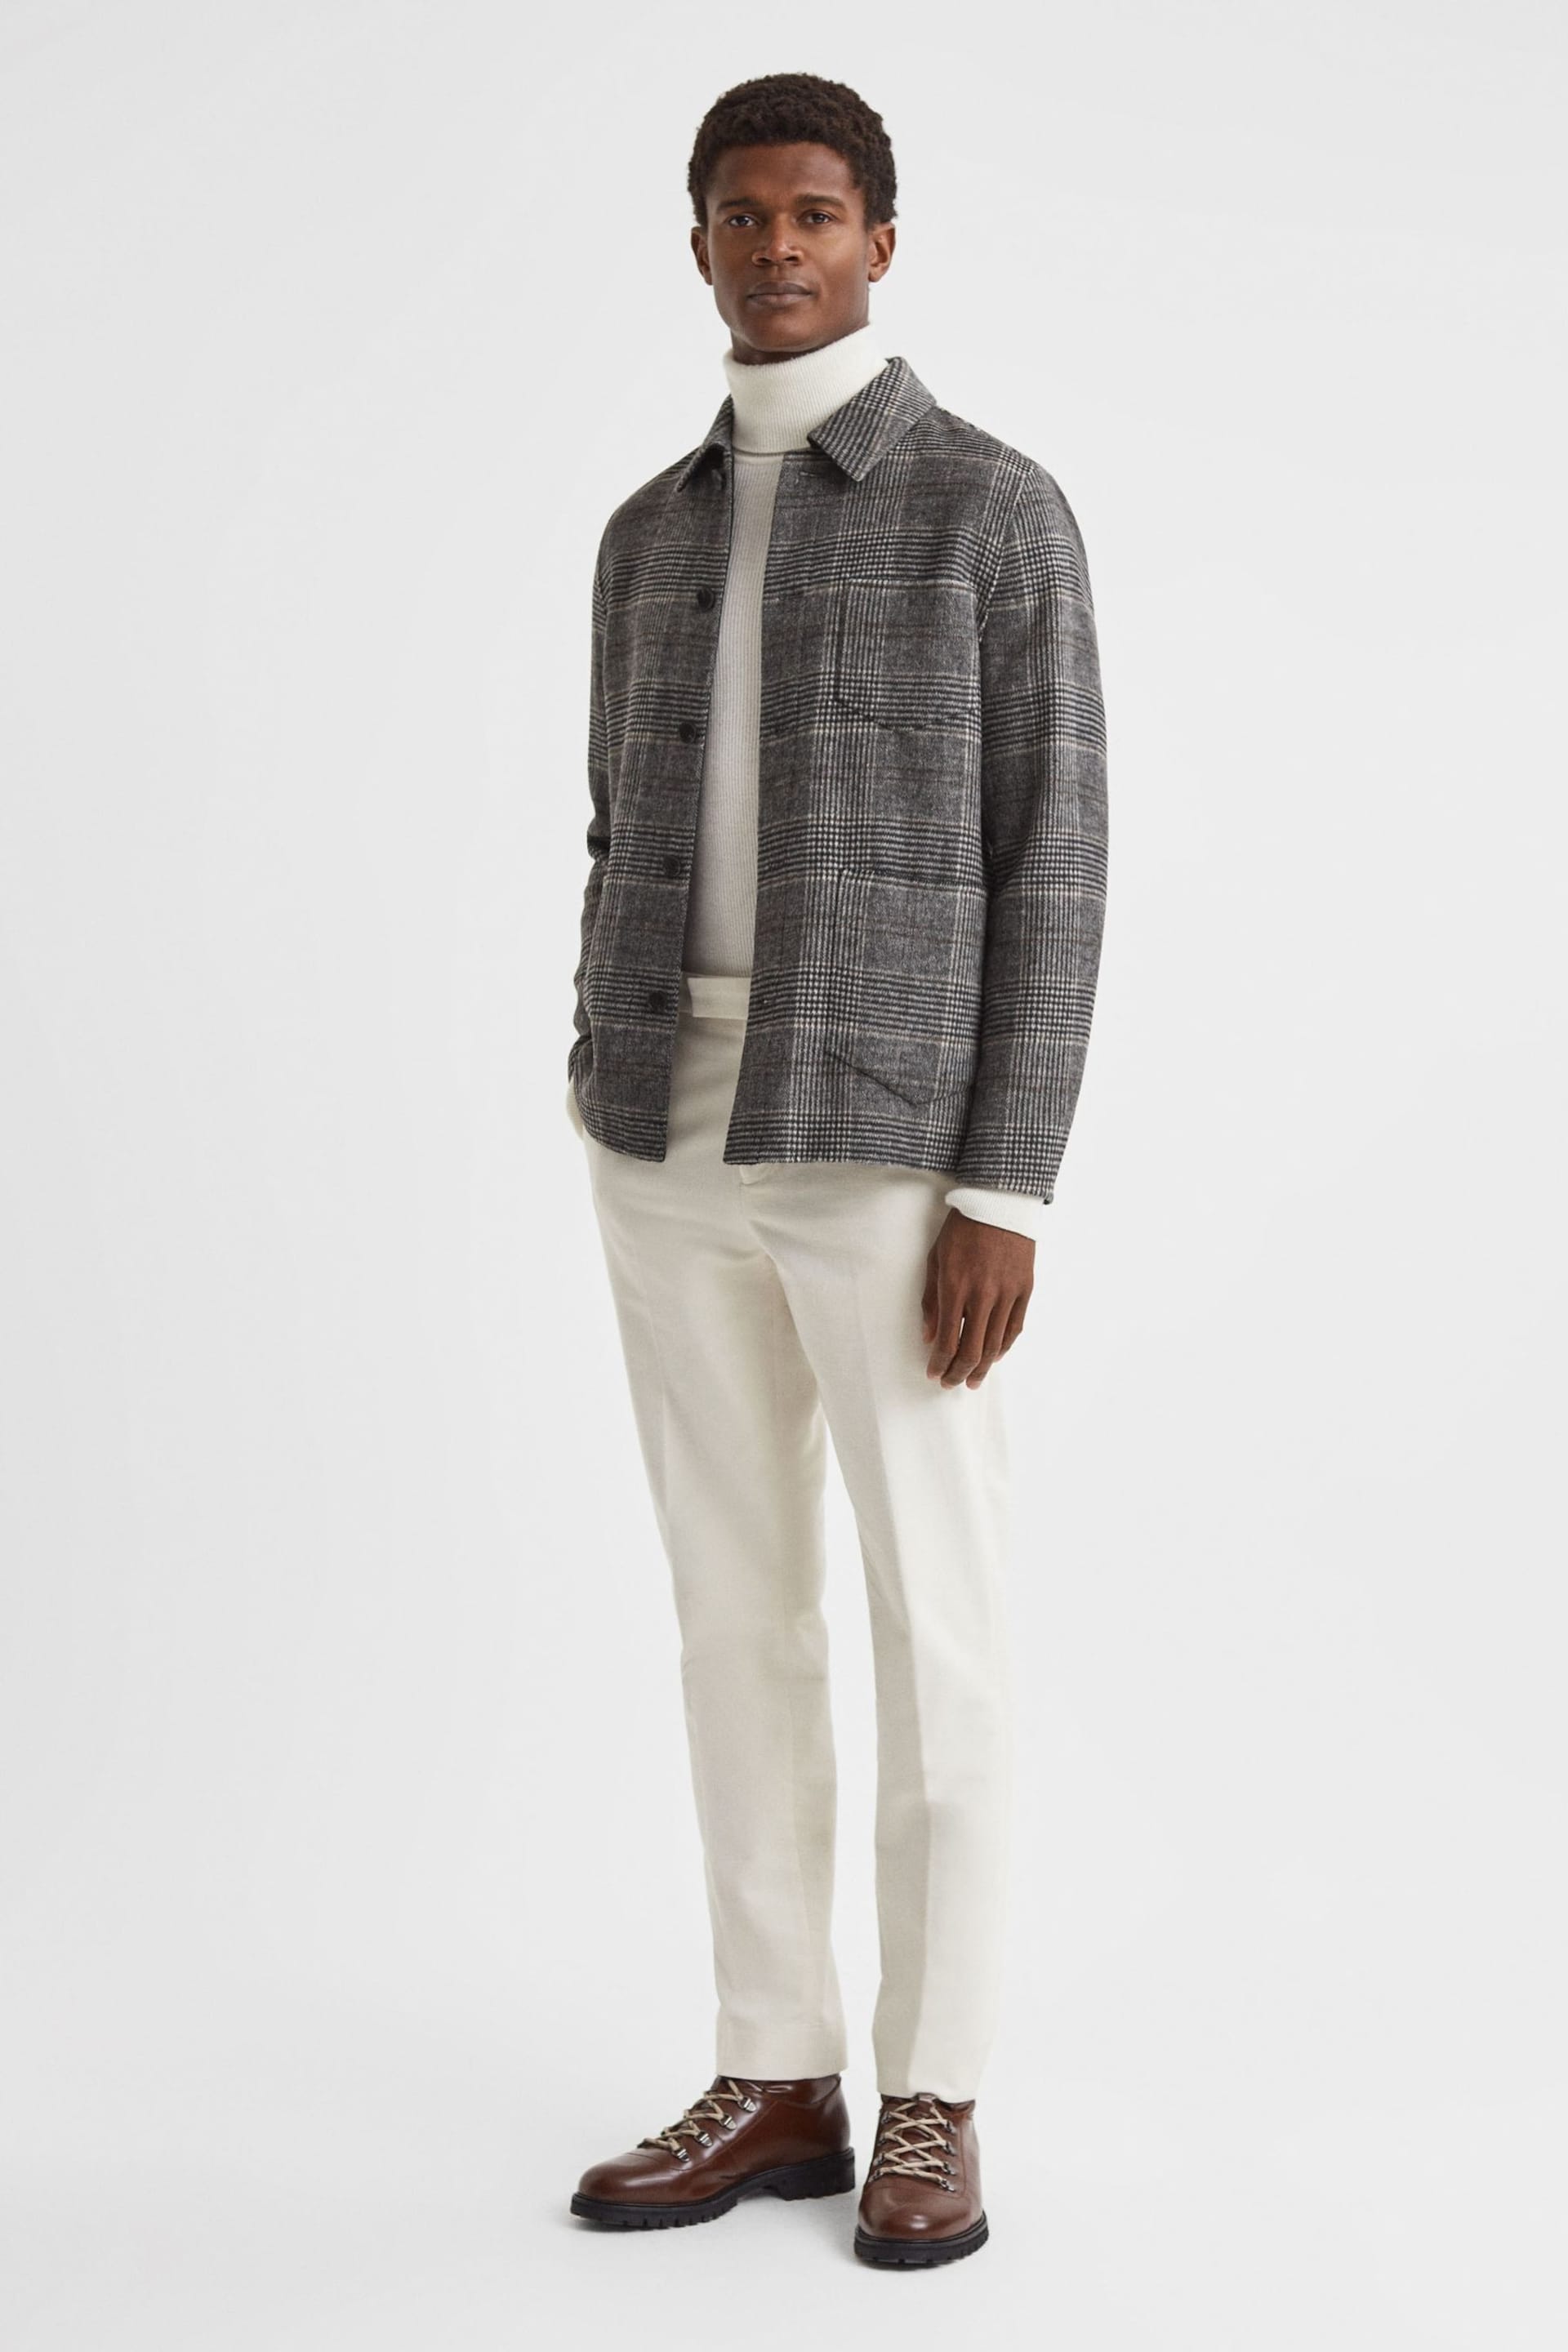 Reiss Charcoal Covert Wool Blend Check Overshirt - Image 3 of 5